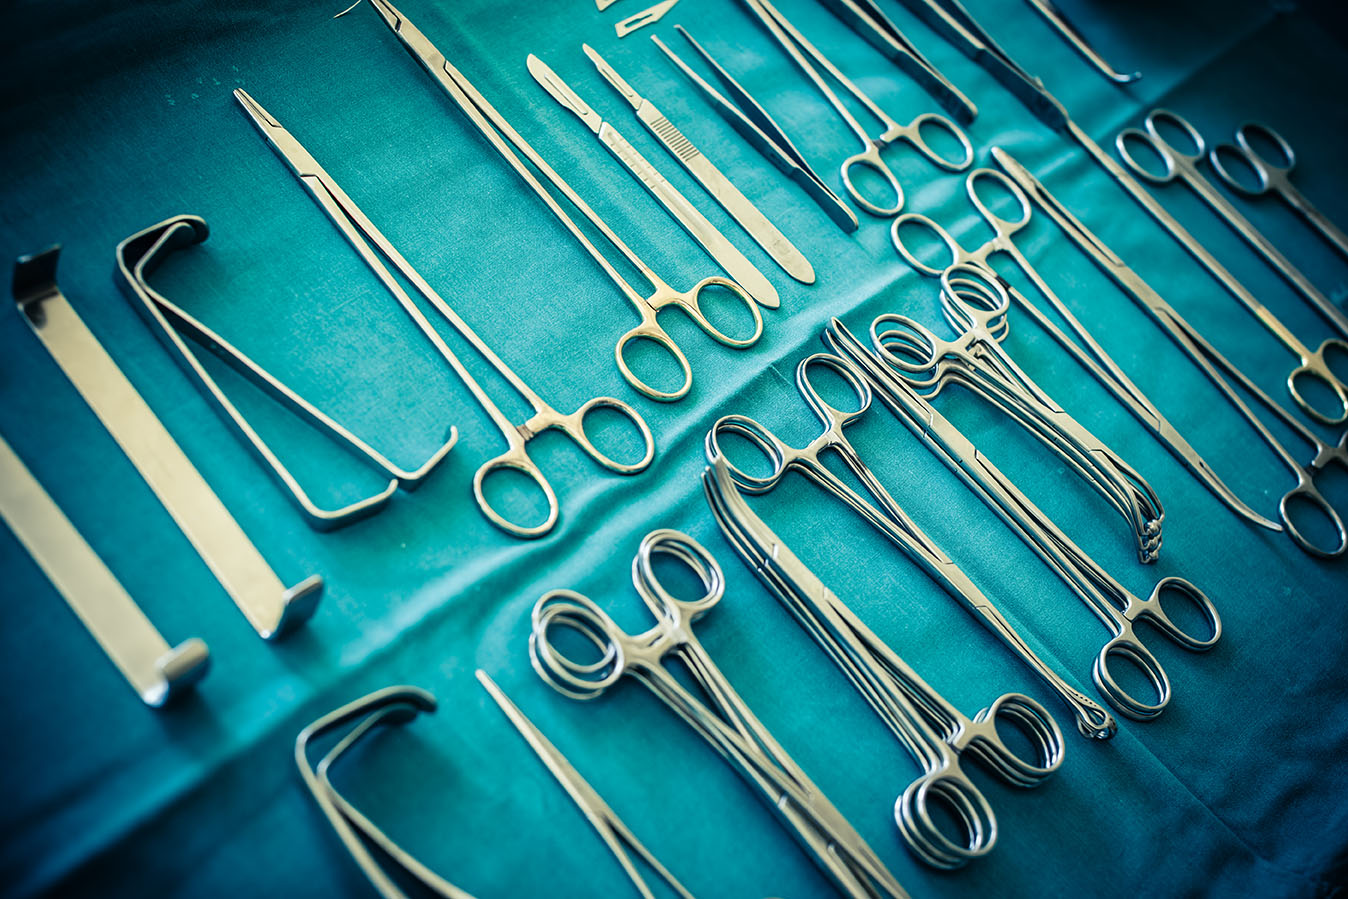 How Are Surgical Instruments Cleaned And Disinfected?